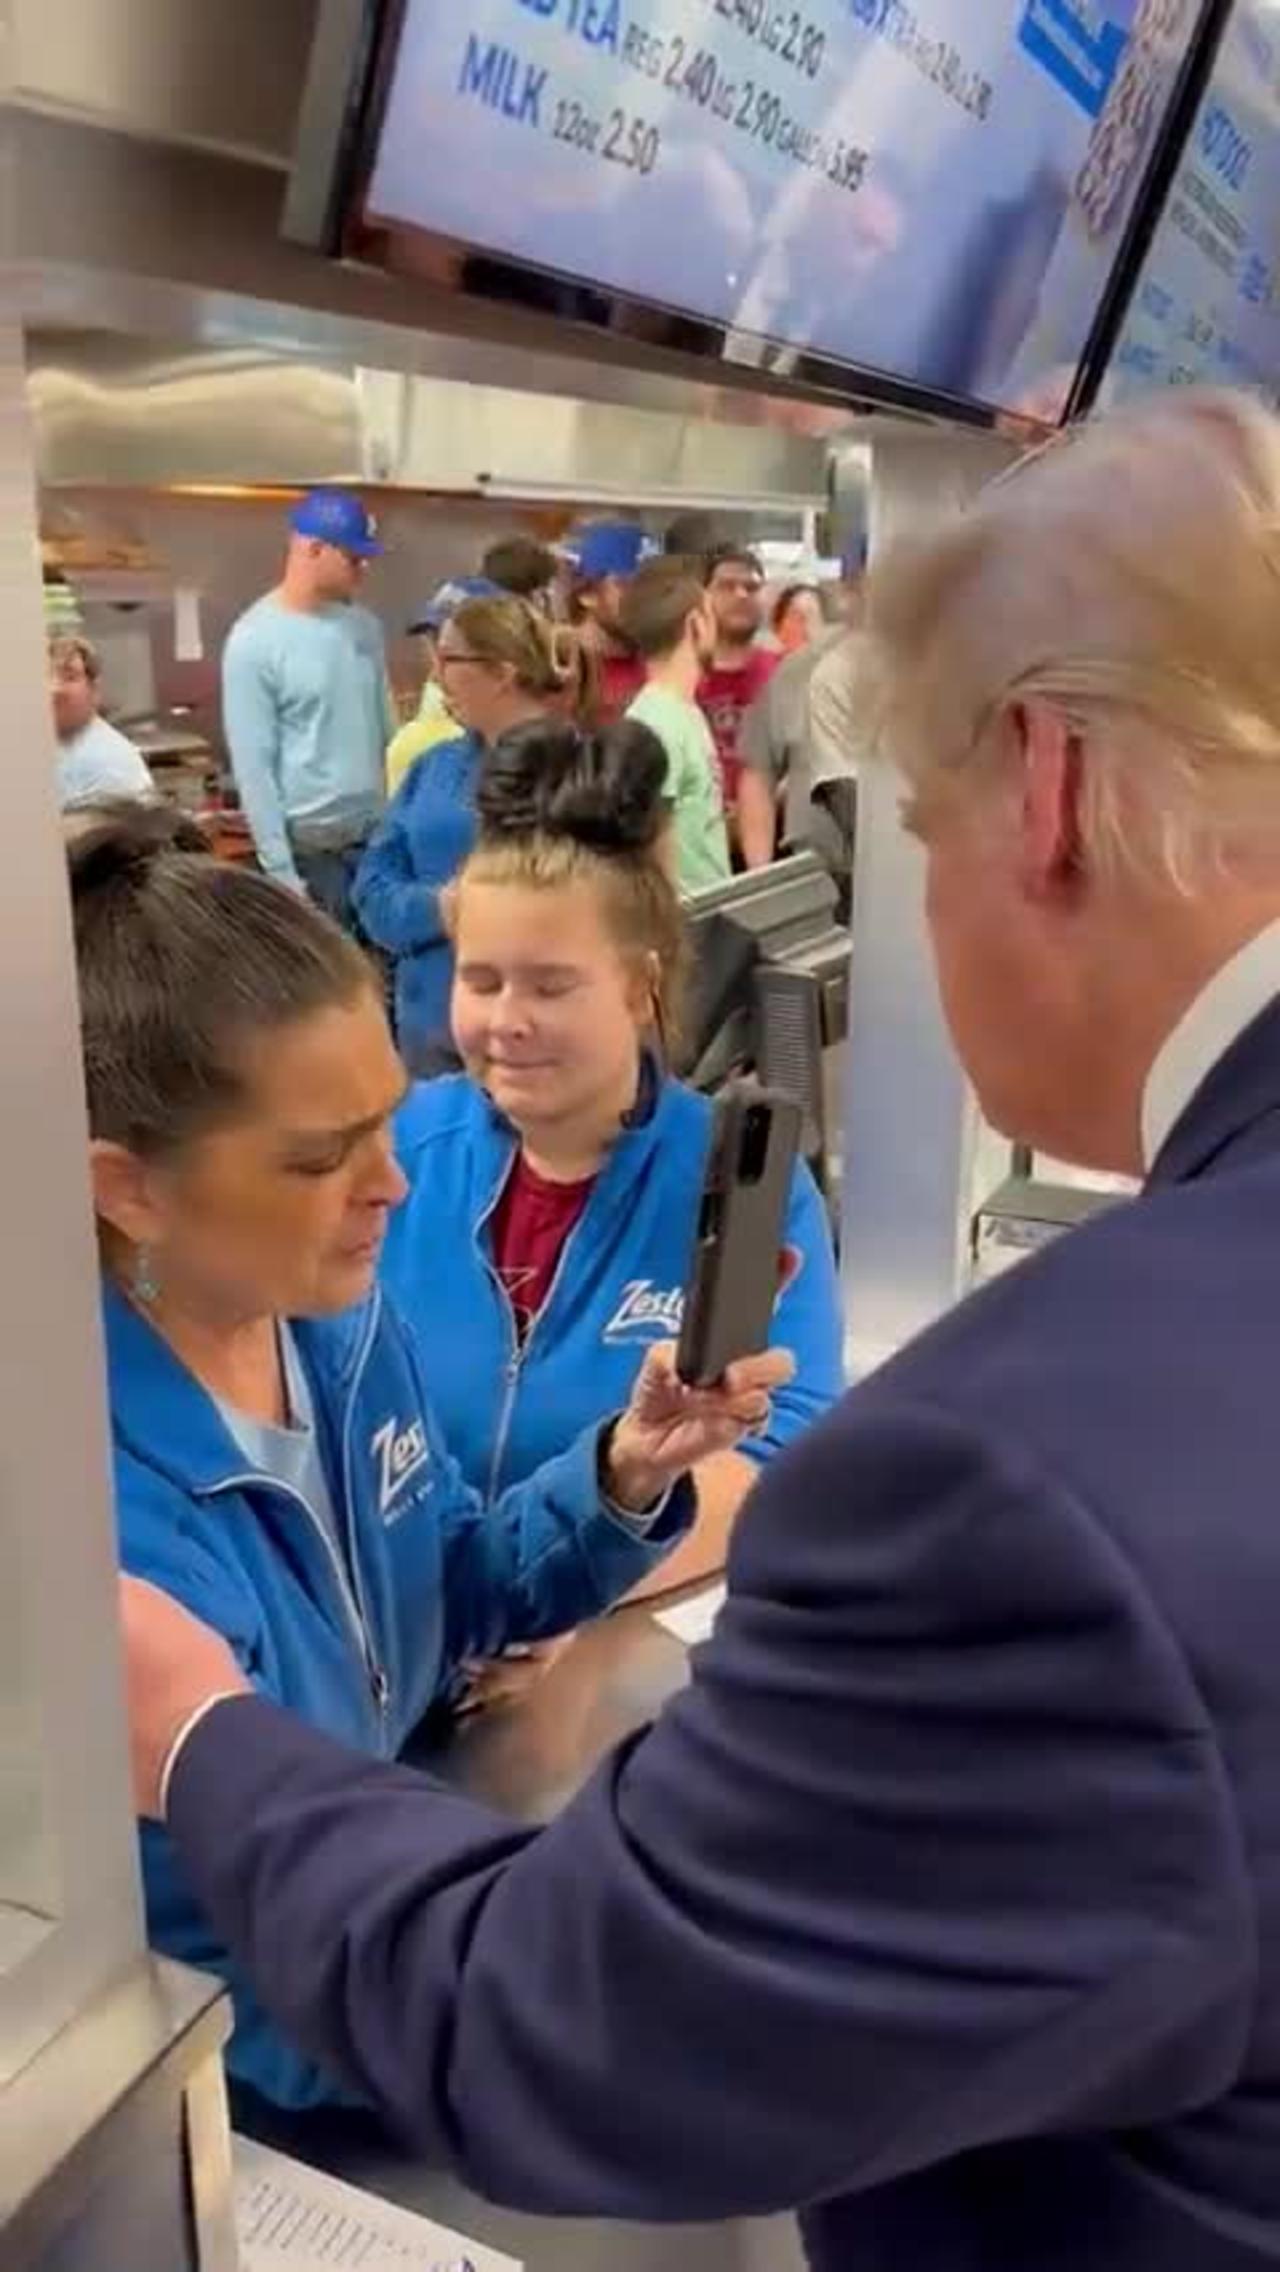 A woman asks President Trump if she can pray for him, watch this touching video!